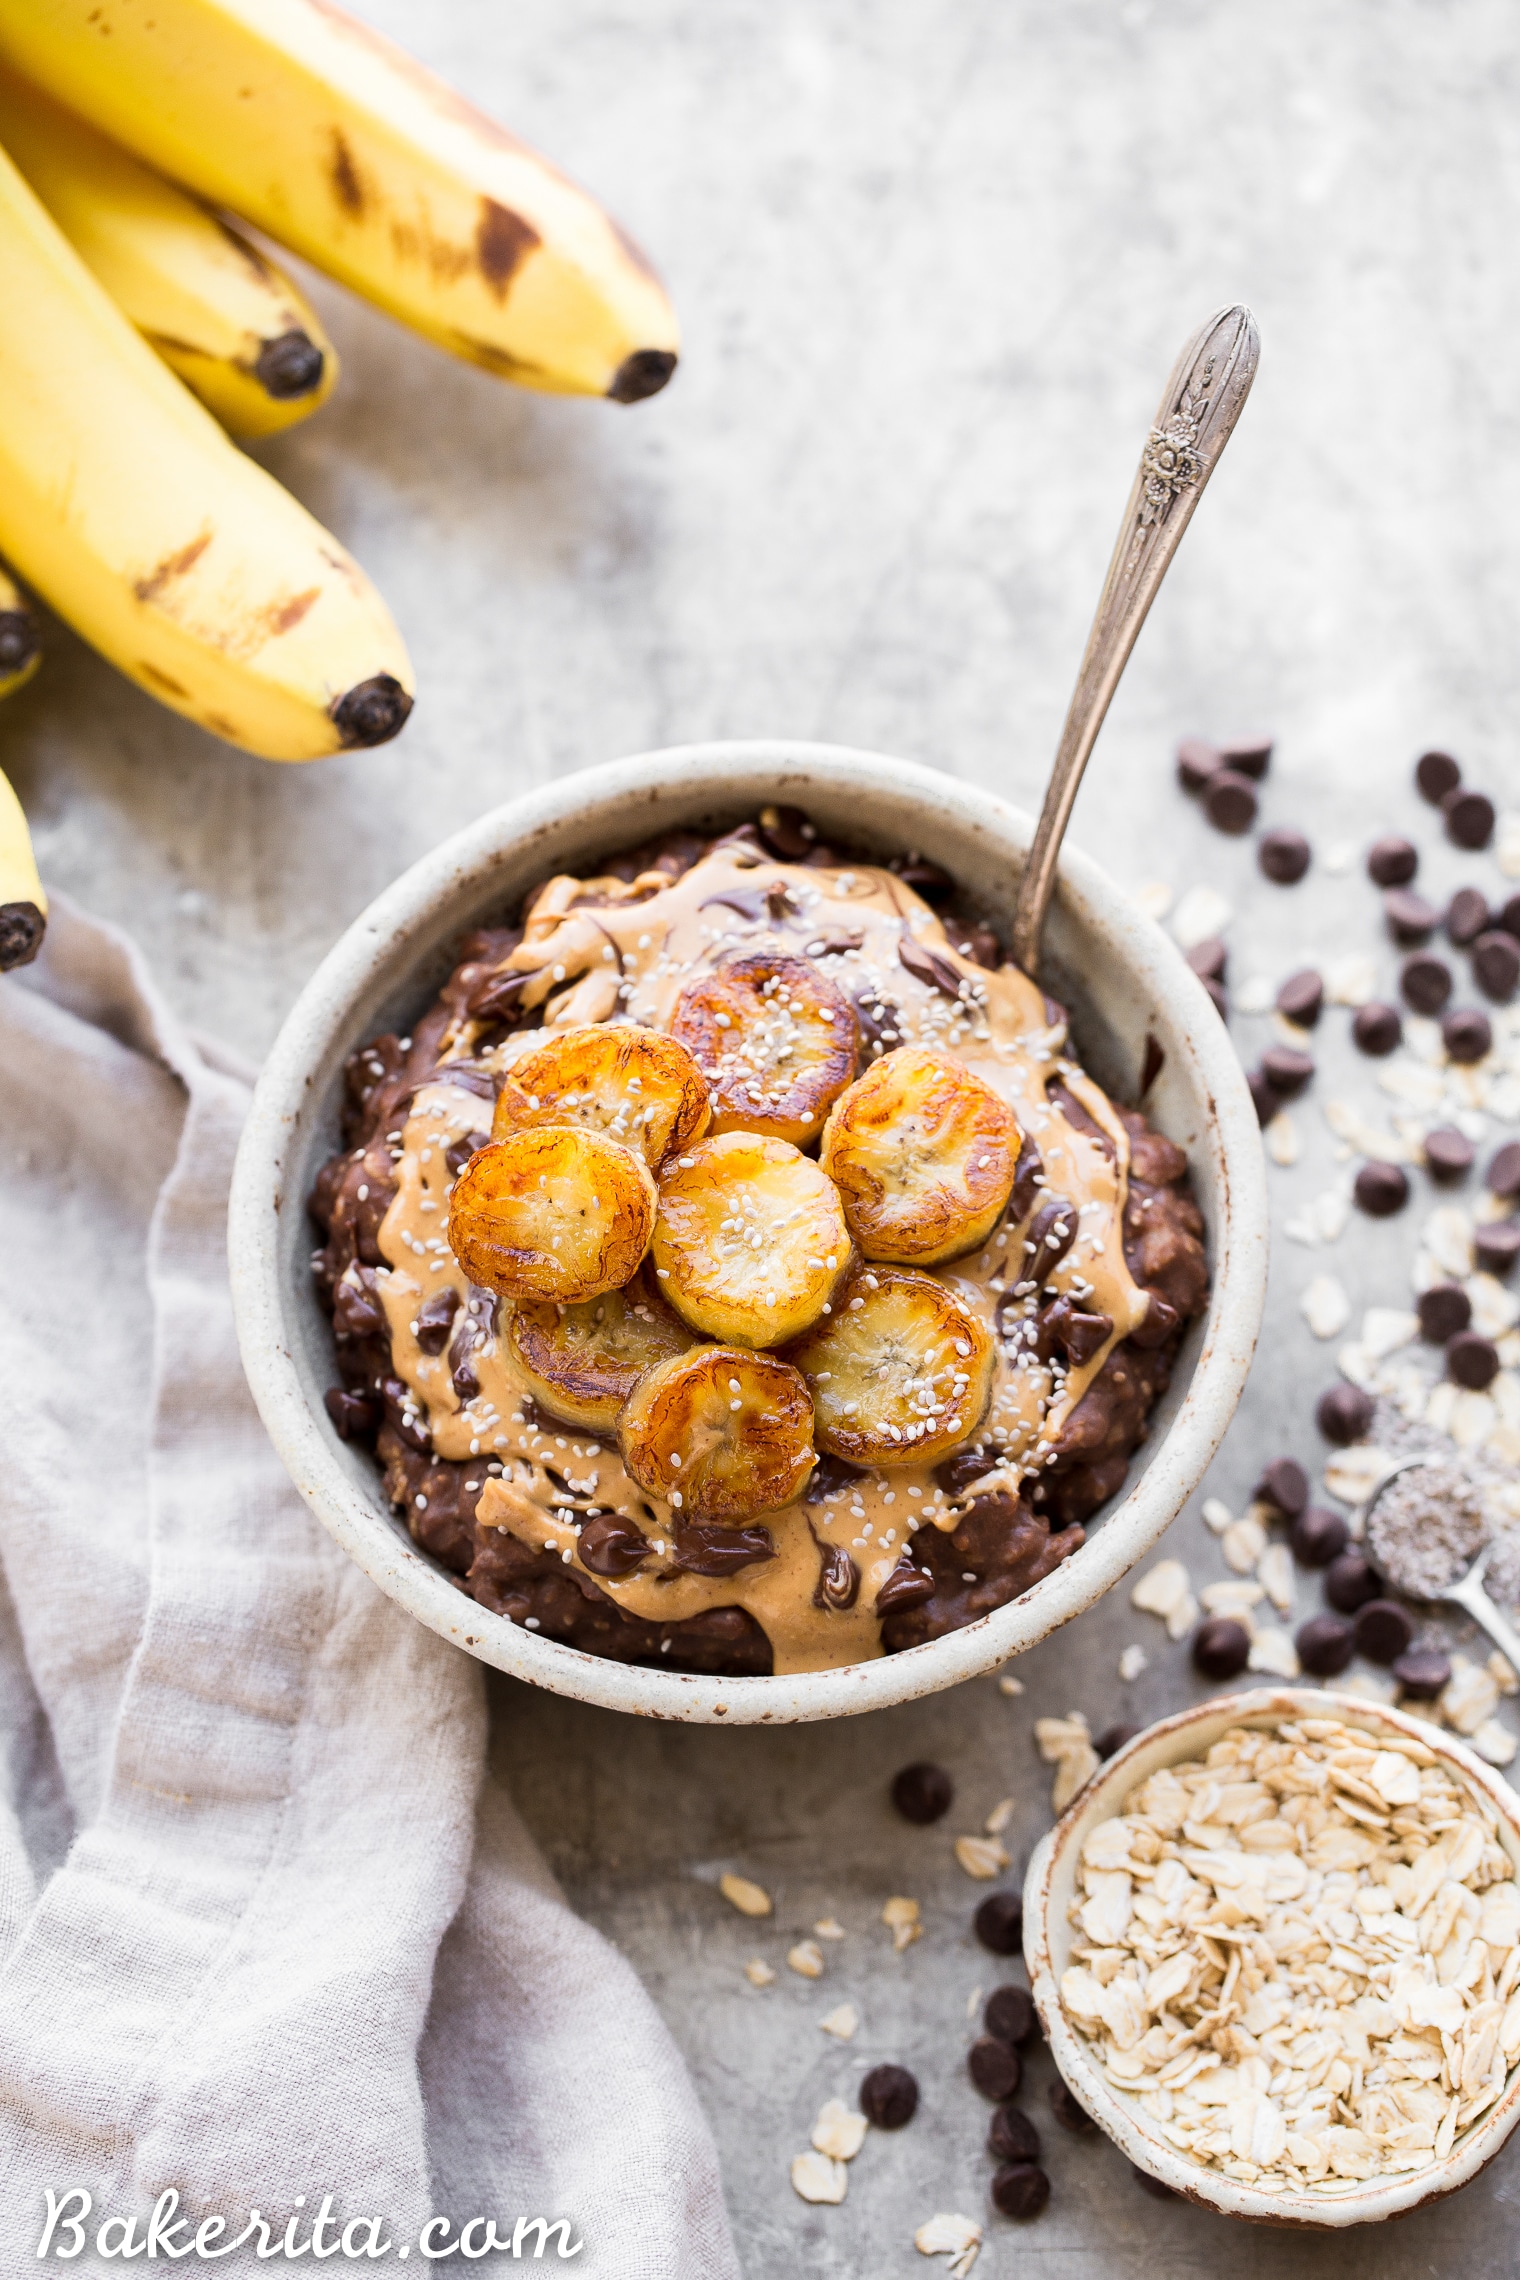 This Chocolate Banana Oatmeal is sweetened with a ripe banana, full of chocolatey flavor, and topped with sweet caramelized bananas! This gluten-free and vegan breakfast has no sugar added and is sure to fill you up and keep you satisfied.